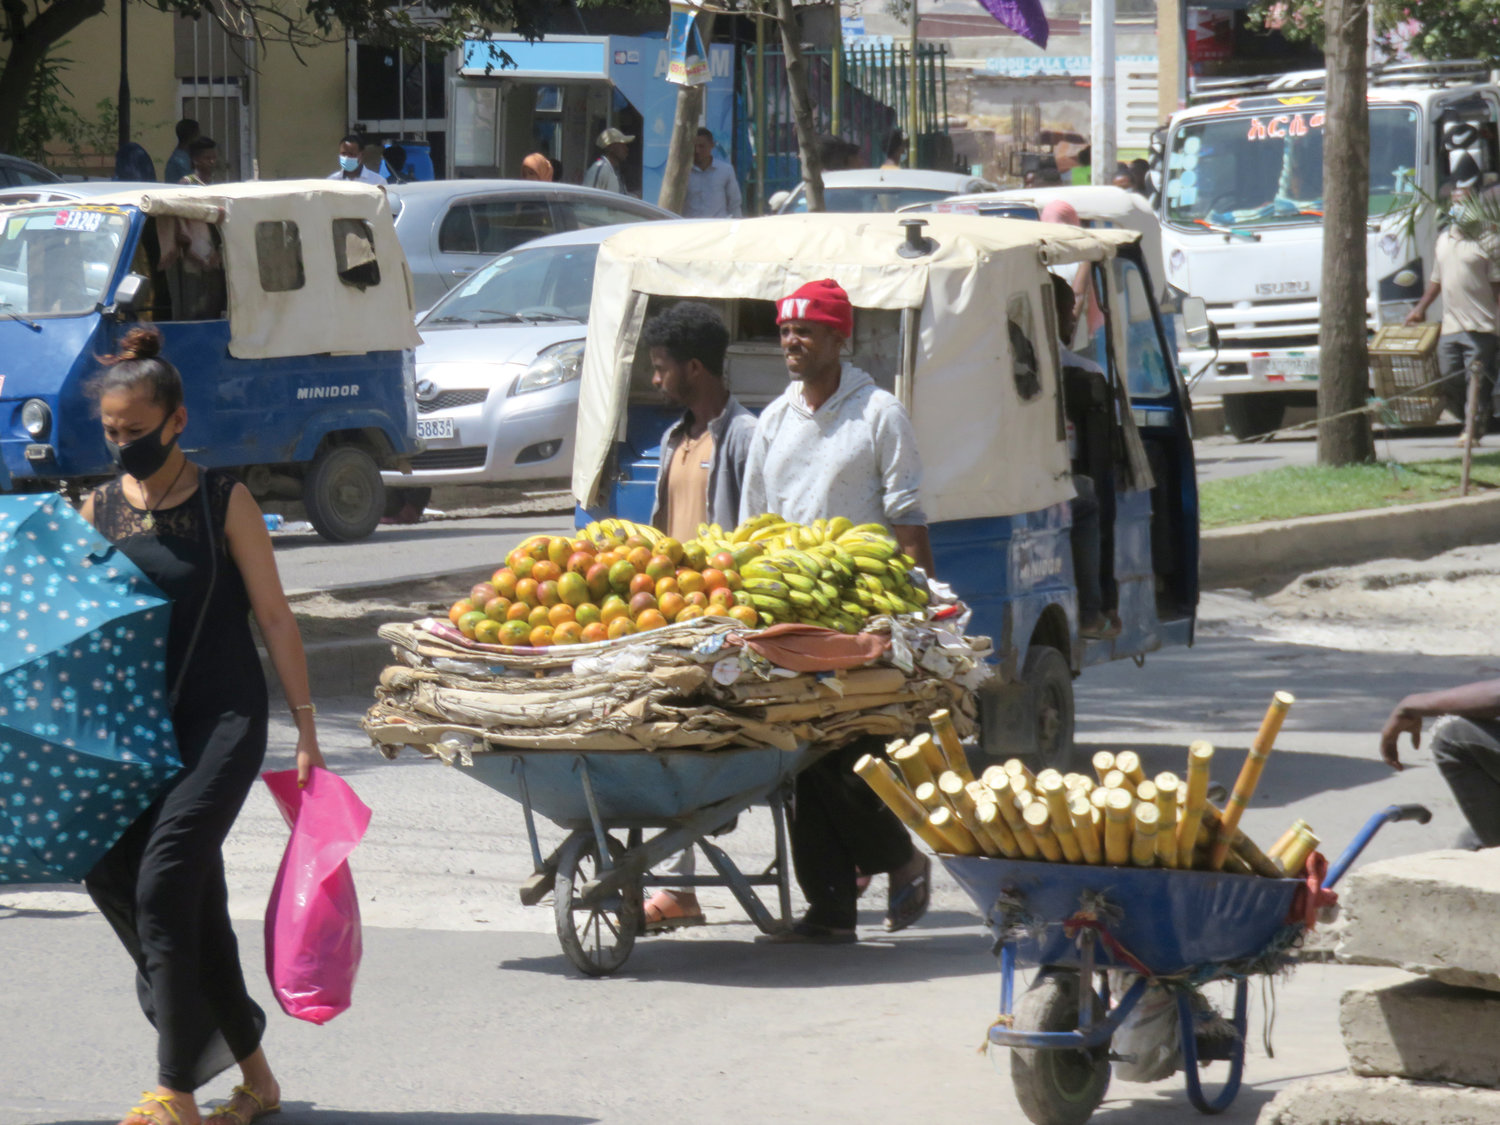 A local vendor wearing a New York hat pushes a cart with fresh produce.